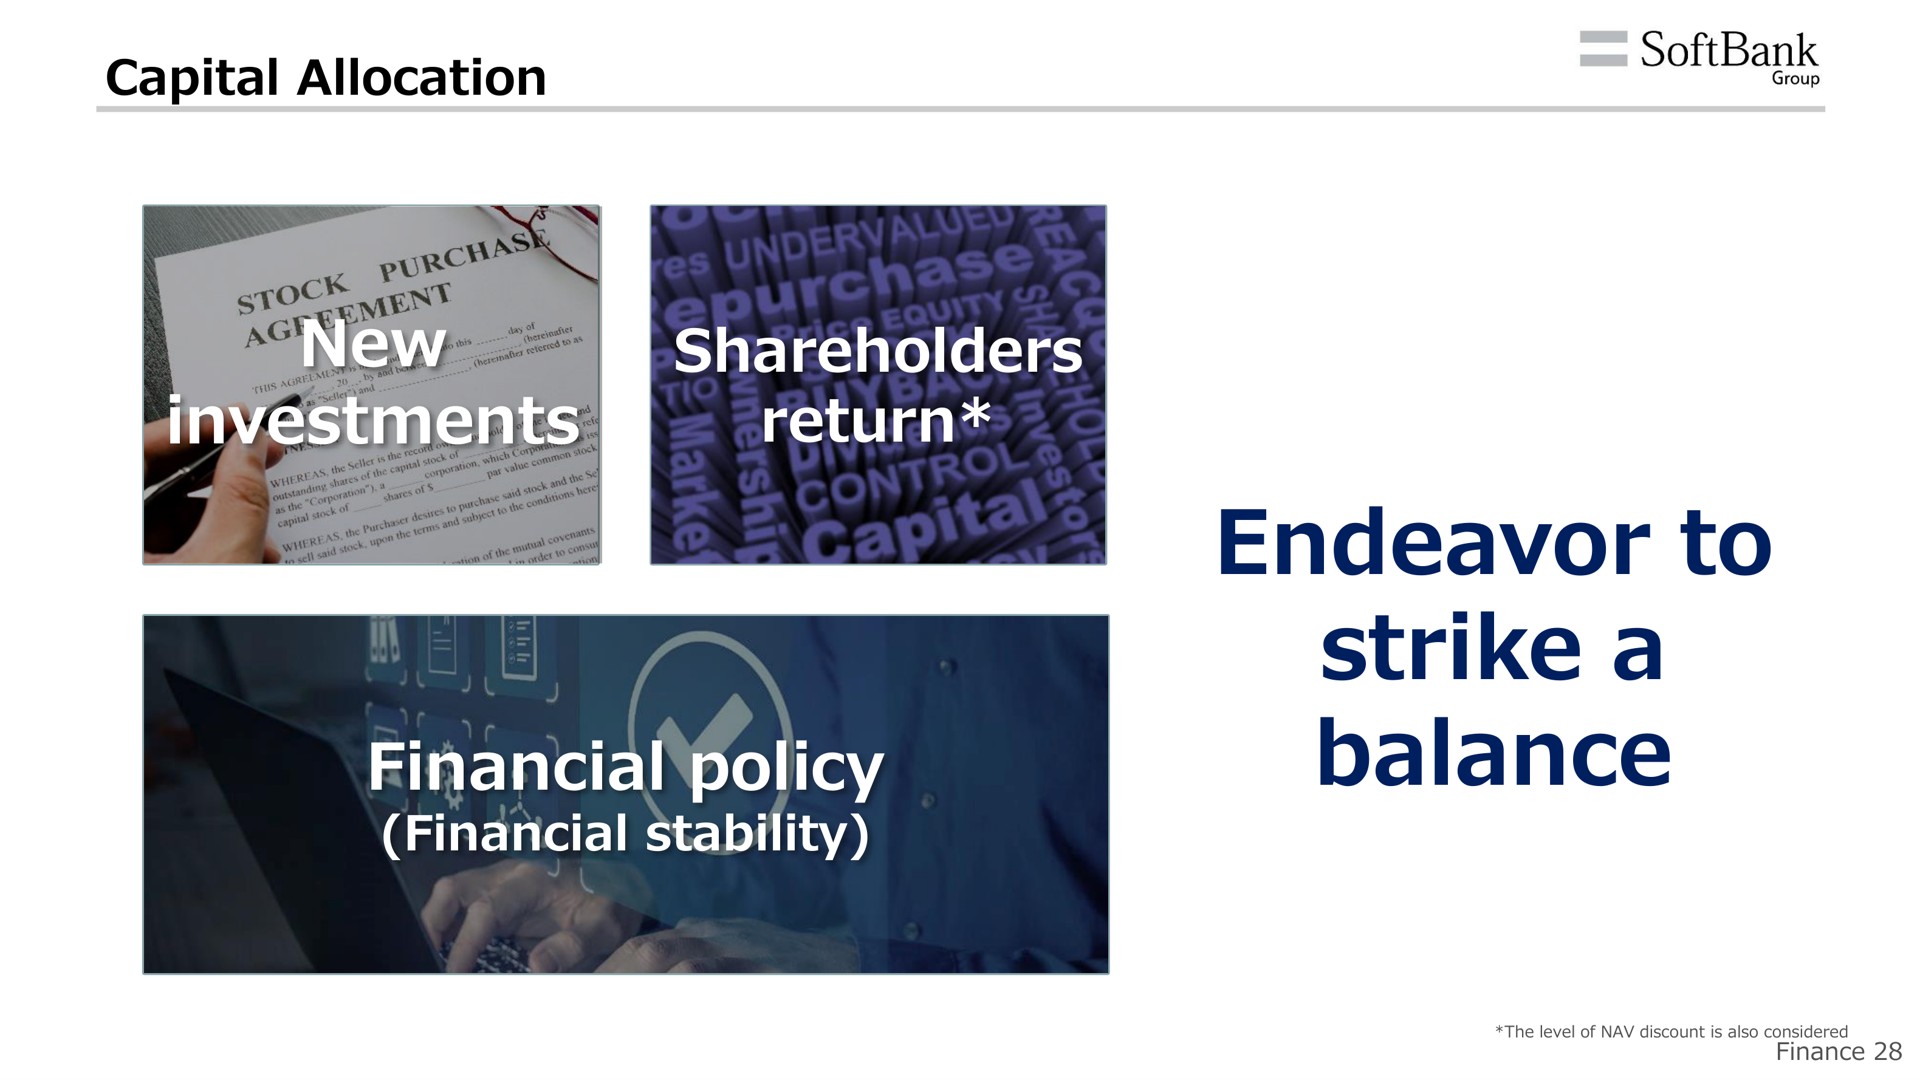 capital allocation new investments shareholders return financial policy financial stability endeavor to strike a balance | SoftBank